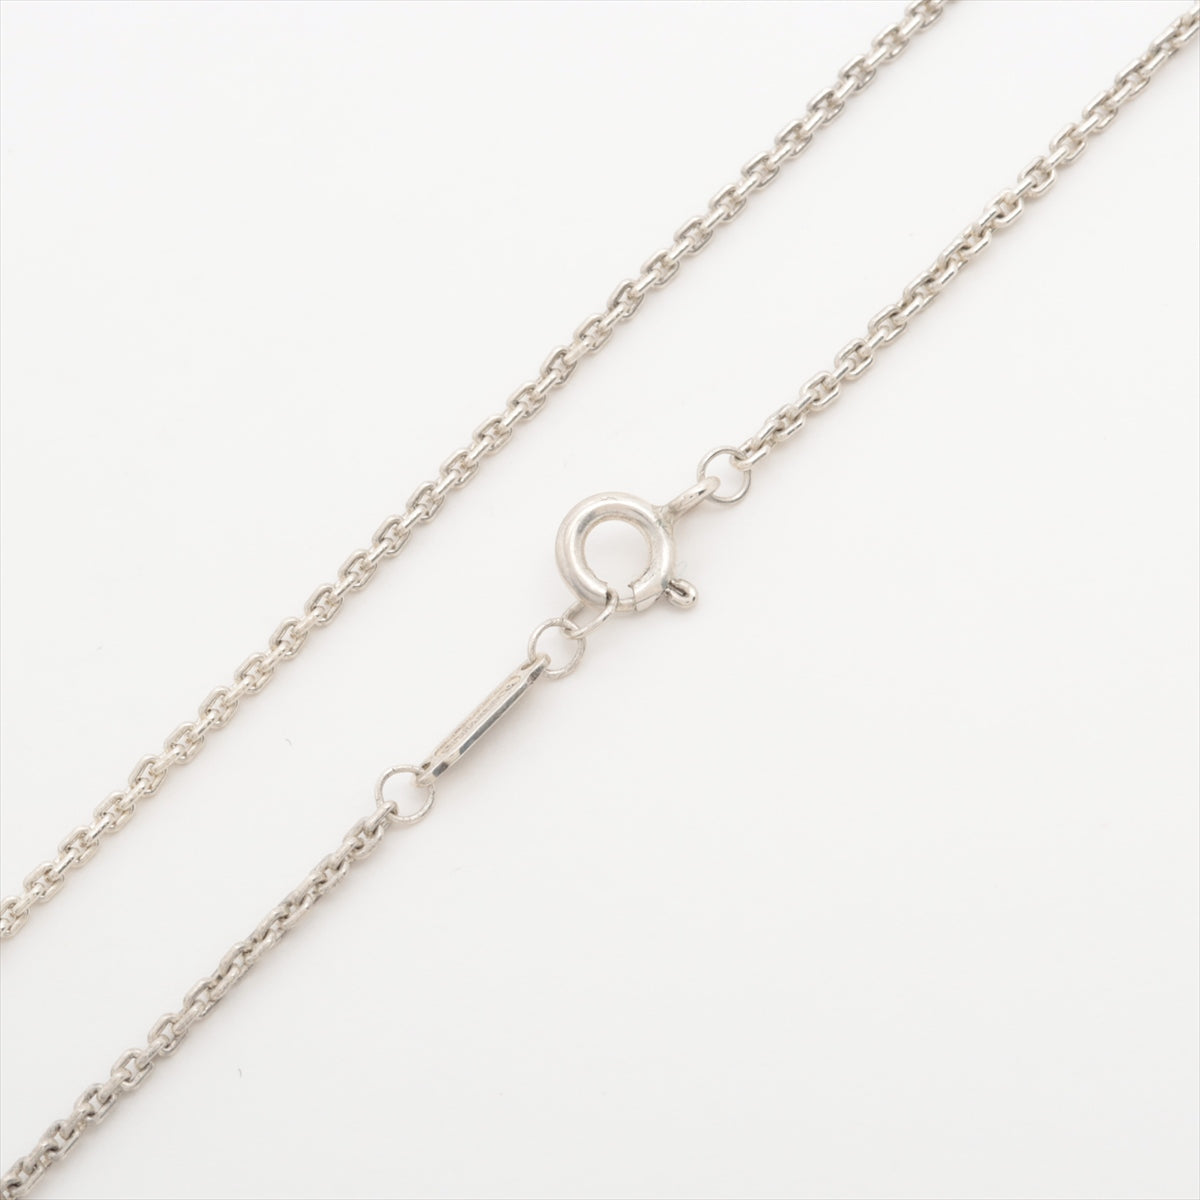 Tiffany Hardware rink Necklace 925 8.5g Silver